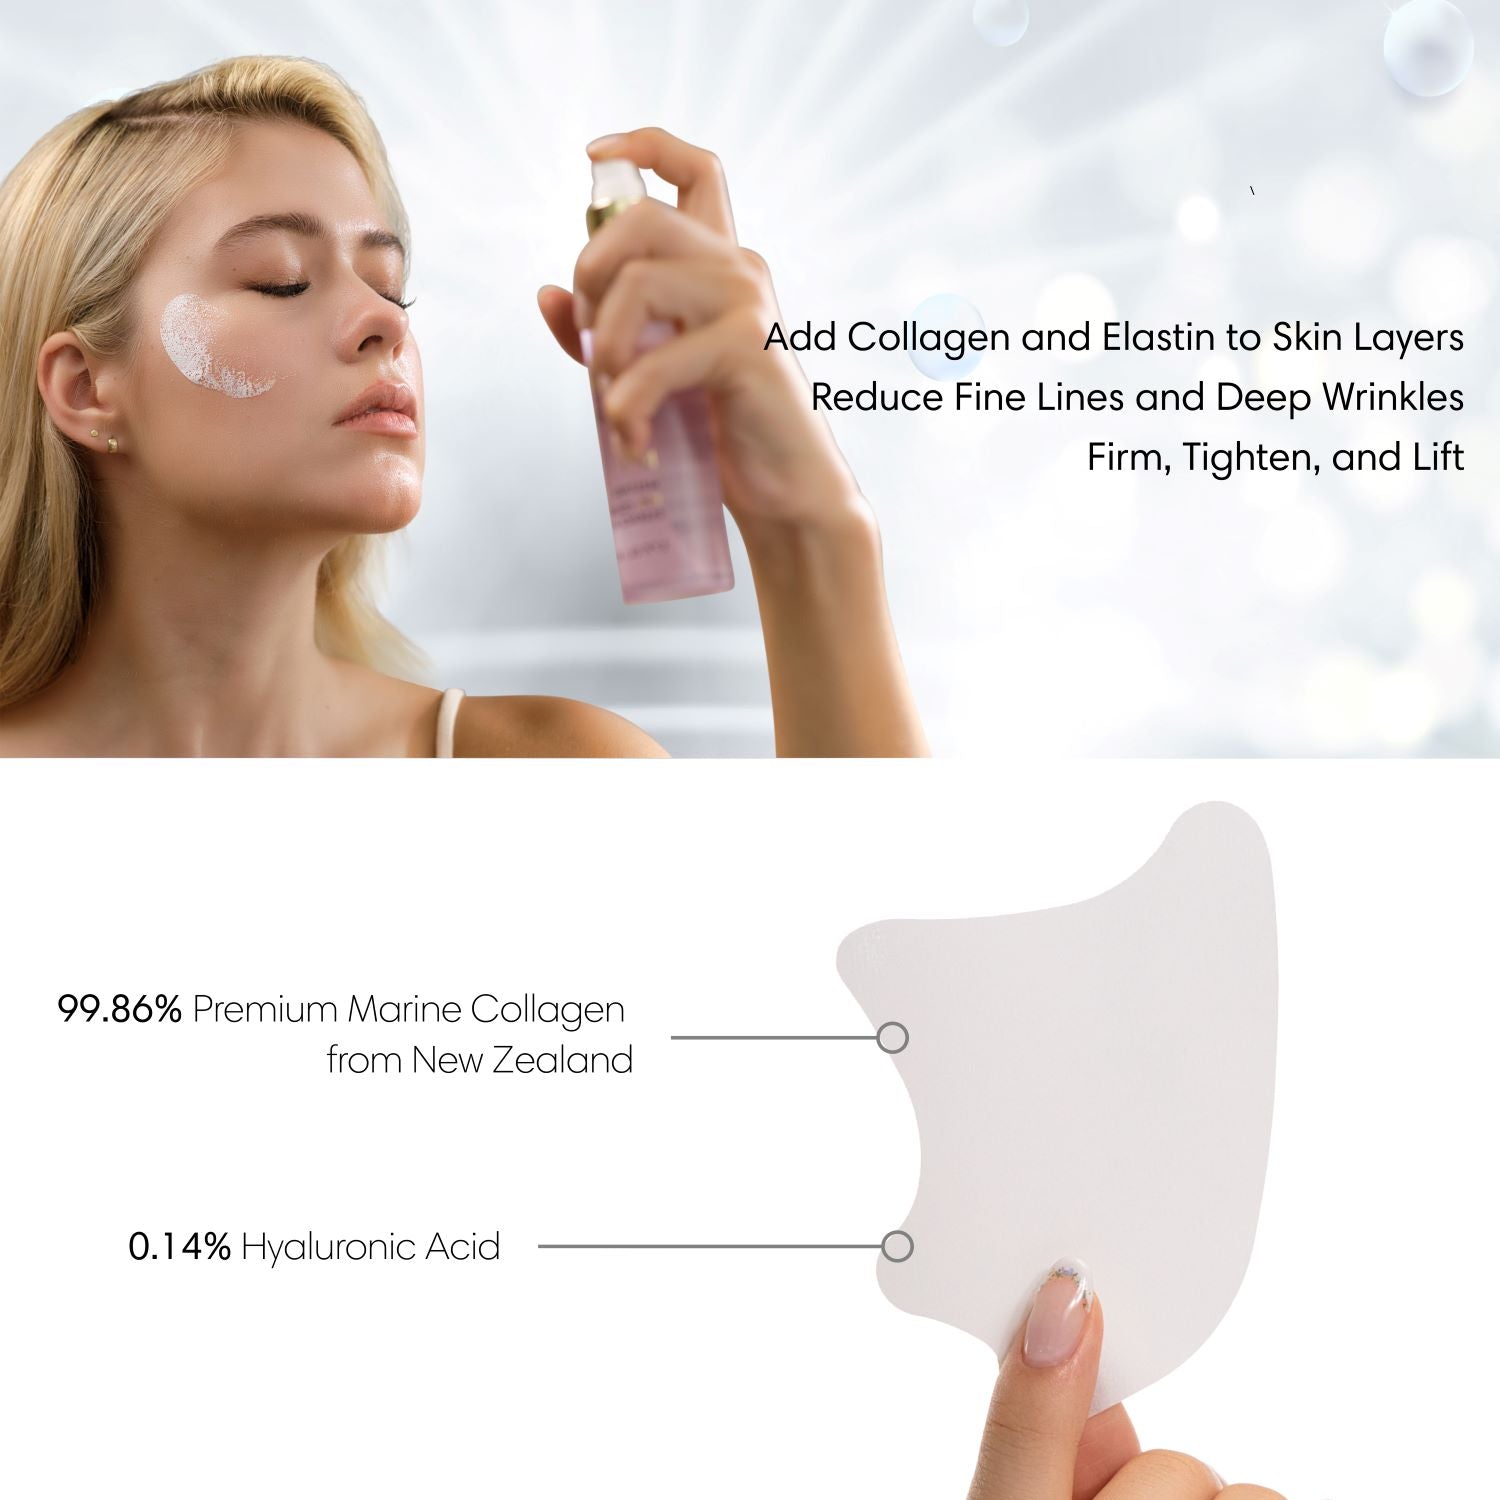 Melting Collagen Set | Anti-Aging Collagen Skincare Routine | Reduce Fine Lines and Wrinkles, Lift, Firm, Hydrate, Brighten, and Strengthen | More Youthful and Radiant Skin Complexion